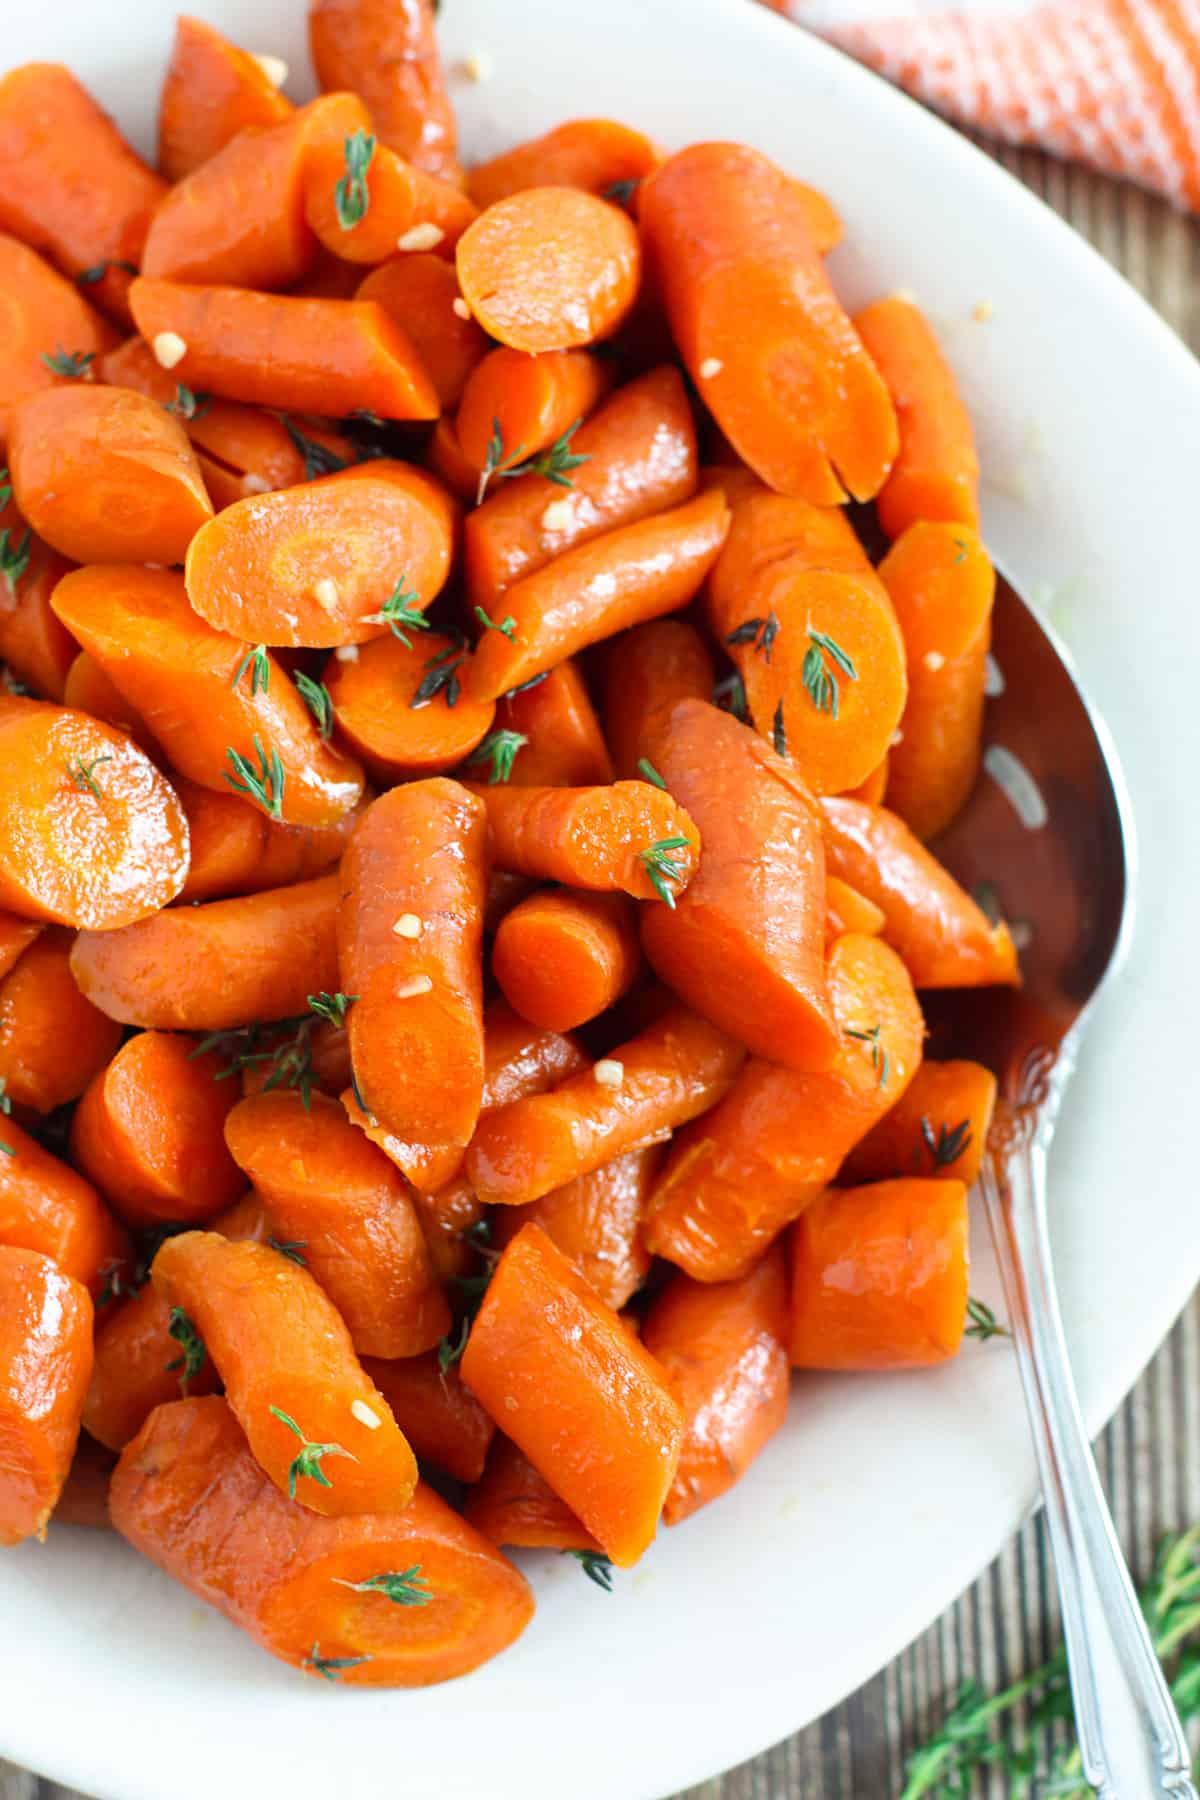 Slow cooker glazed carrots with serving spoon.